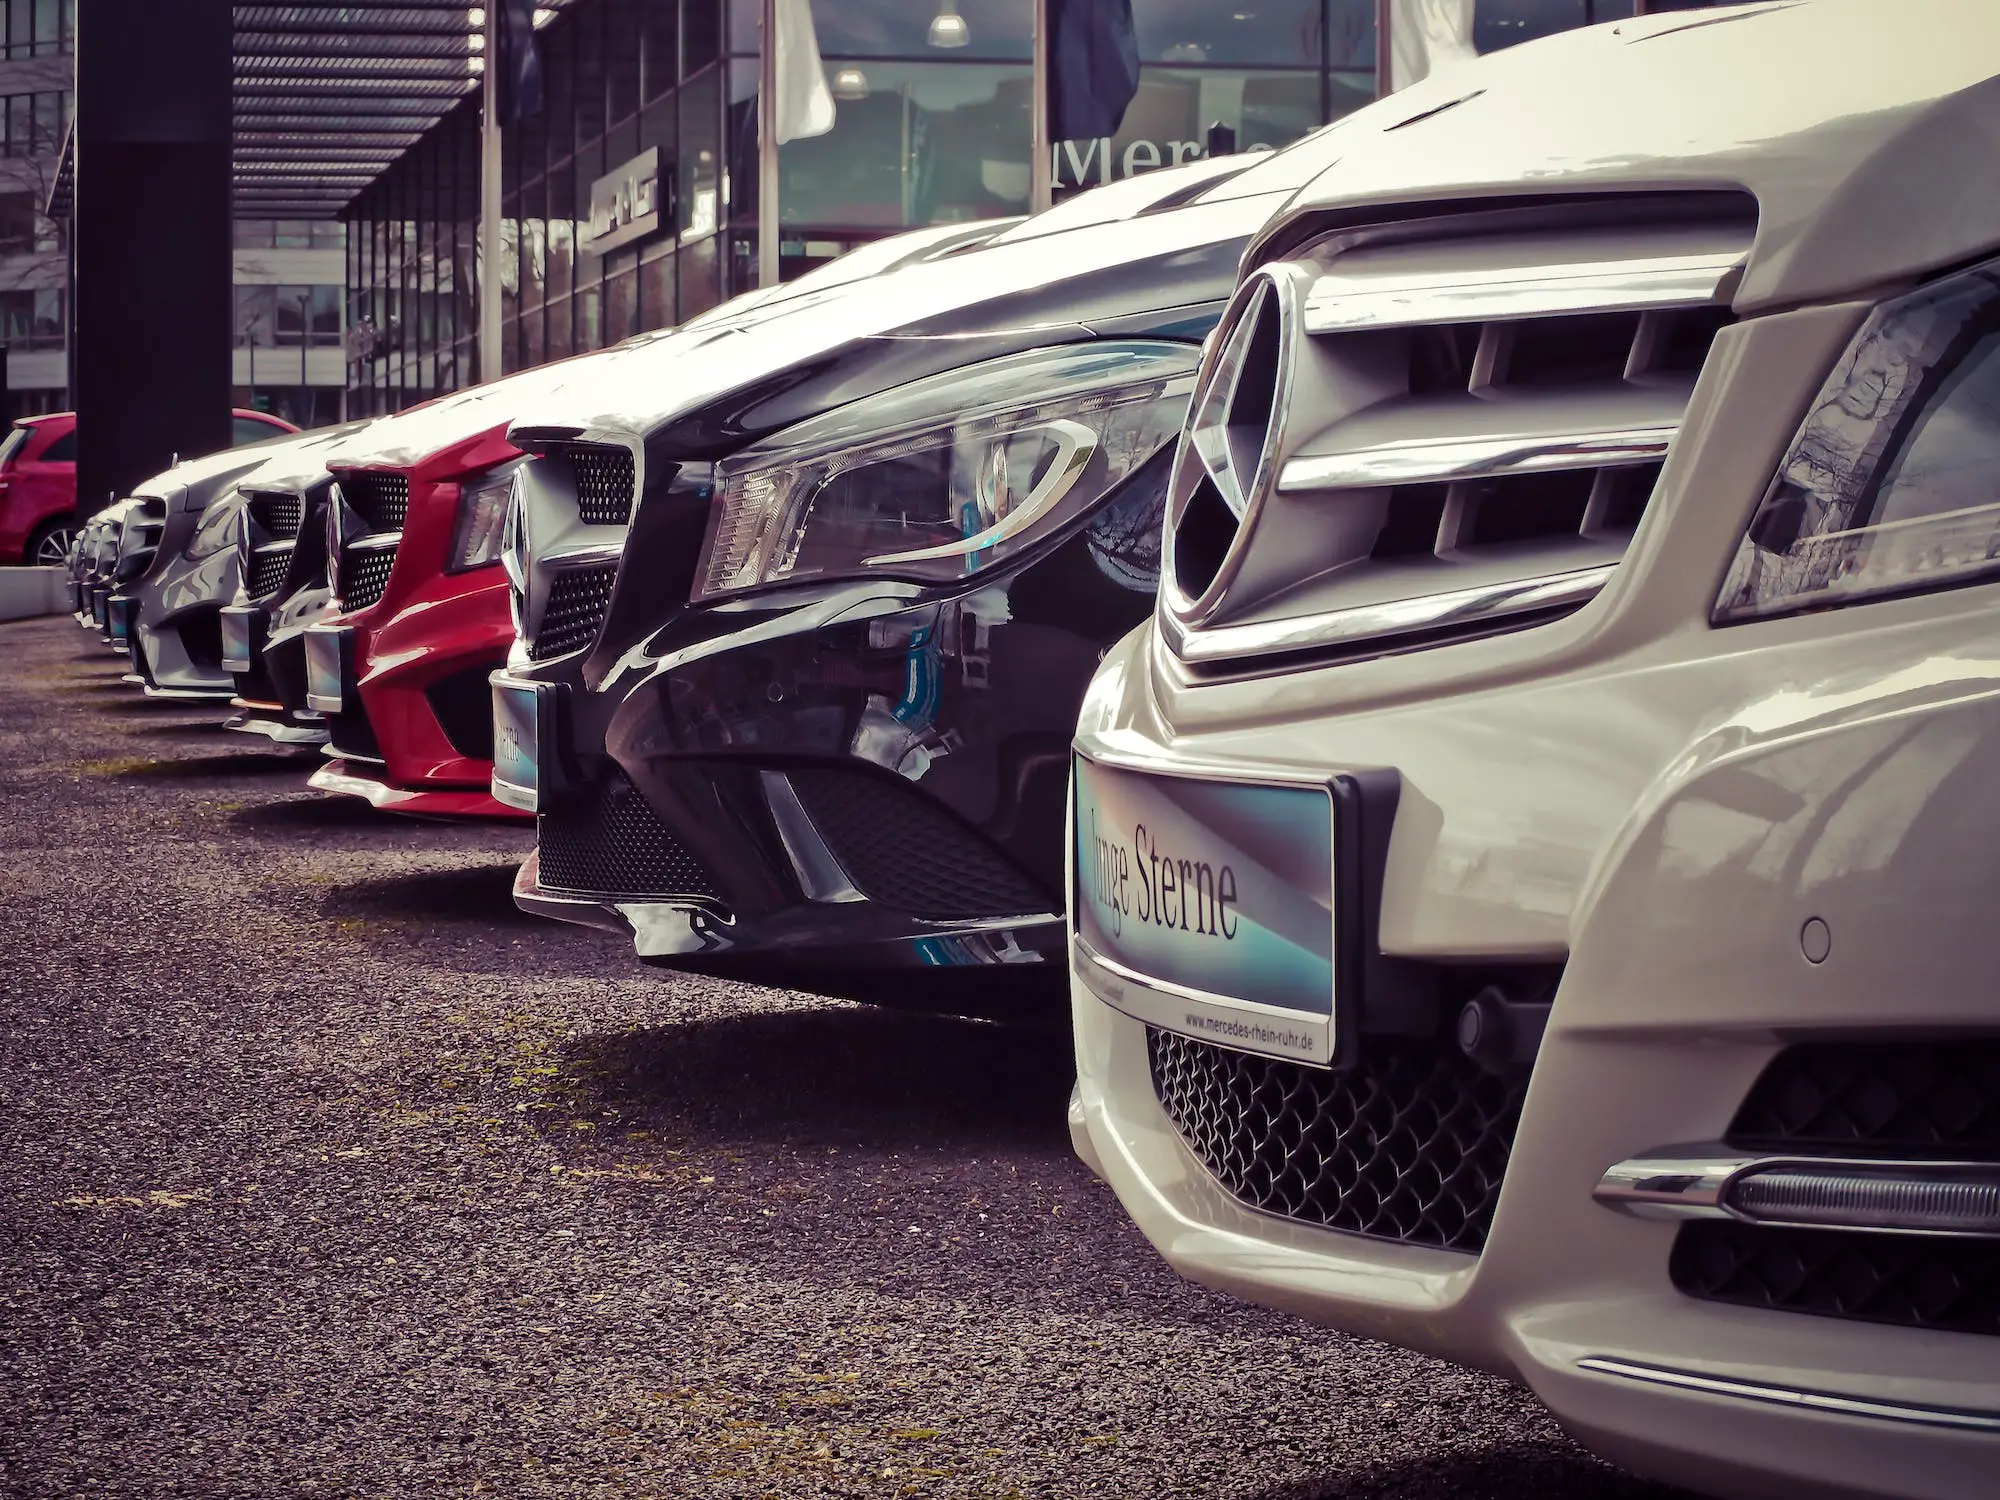 Compare Auto Insurance Rates by Vehicle to Find the Right One